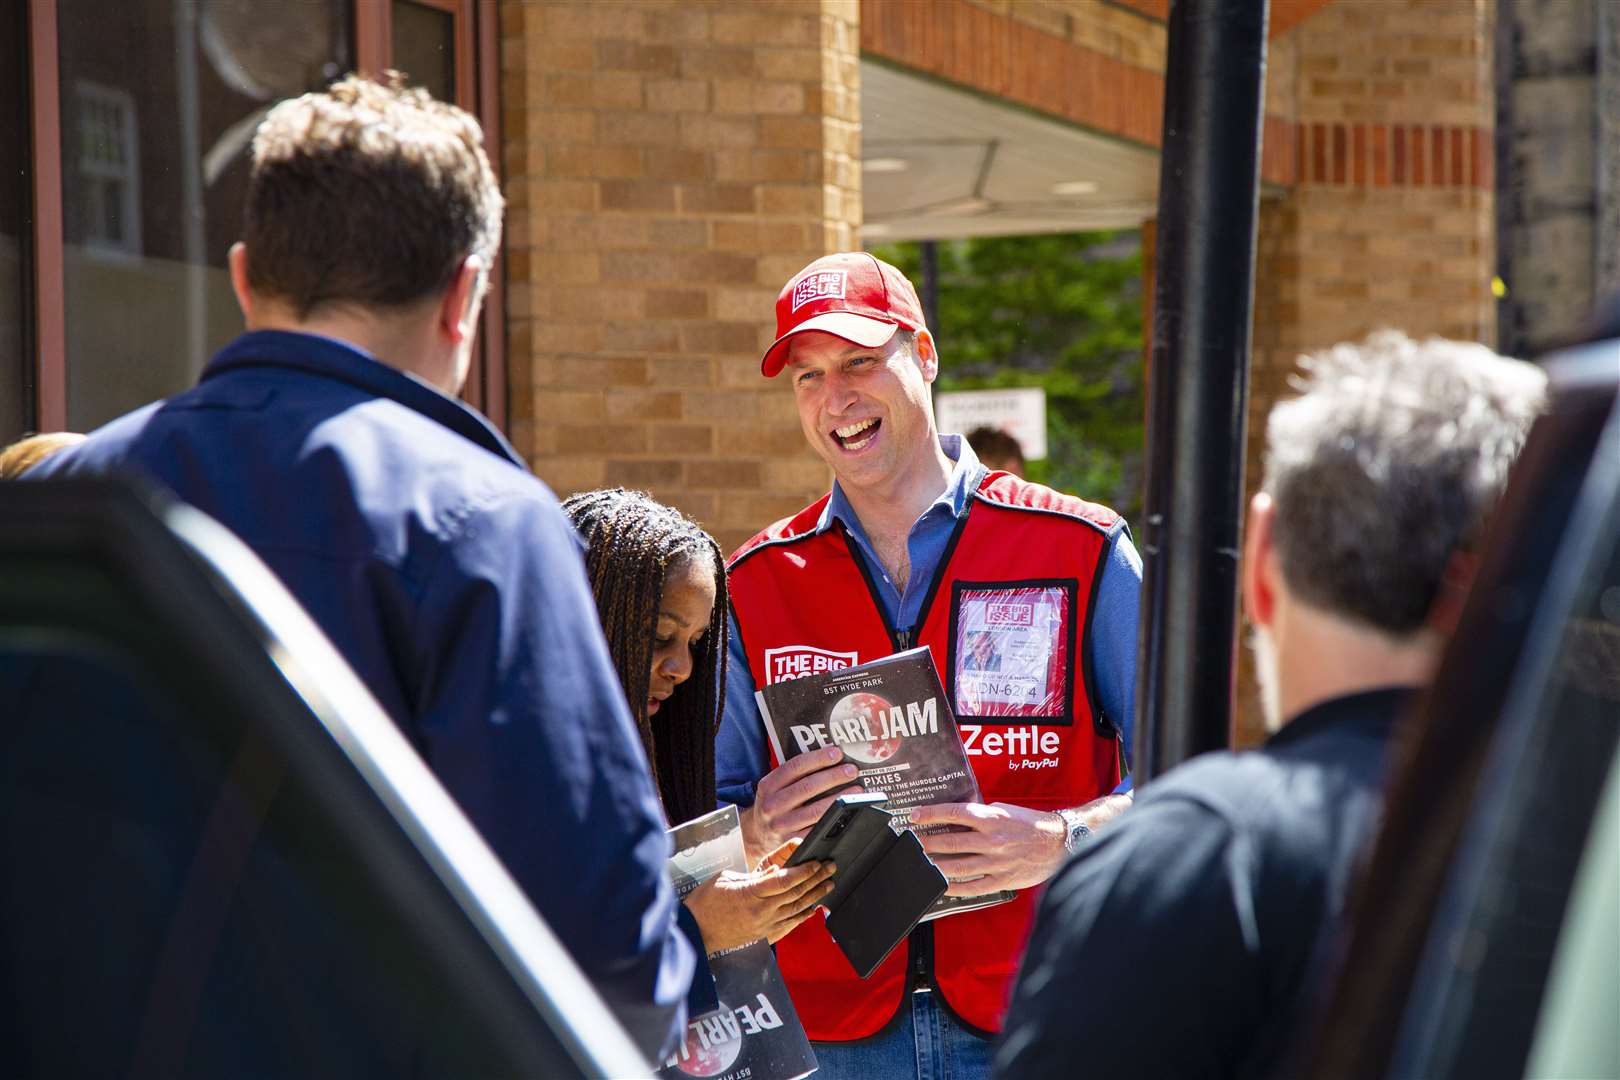 The Duke of Cambridge selling the Big Issue in London (Andy Parsons/The Big Issue/PA)